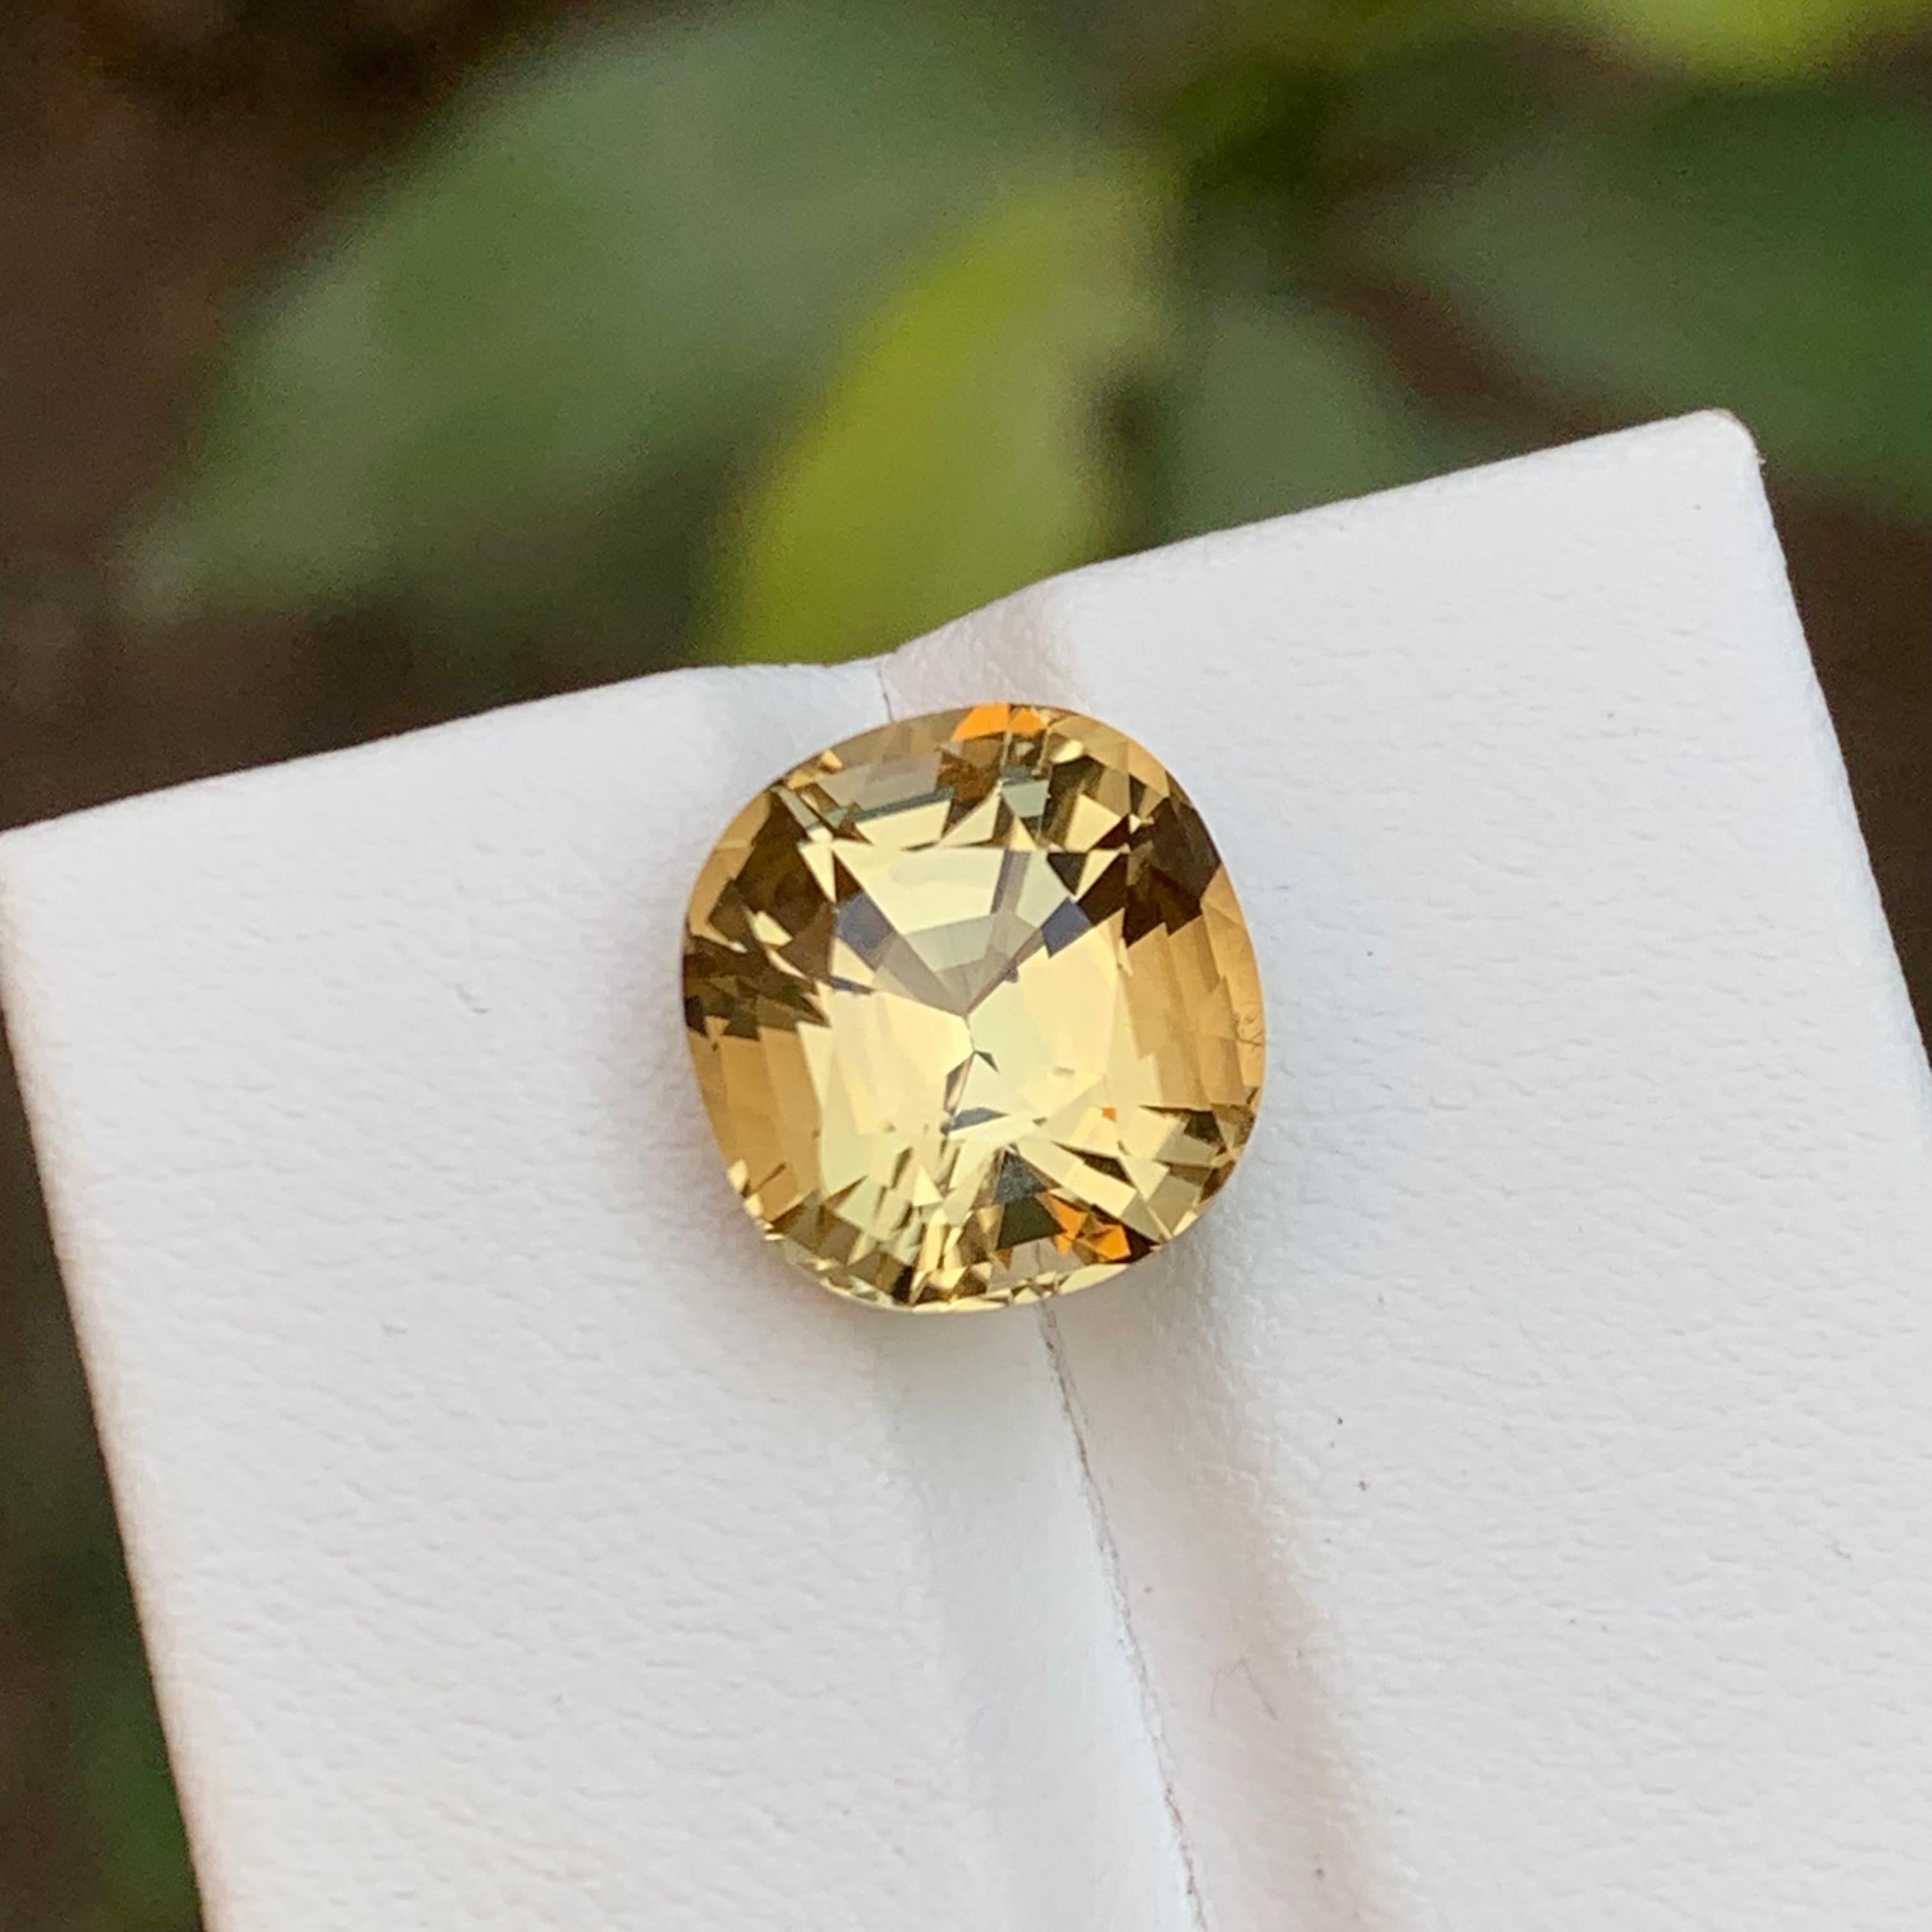 Golden Yellow Natural Tourmaline Gemstone, 6.75 Ct Cushion Cut for Ring/Pendant For Sale 3